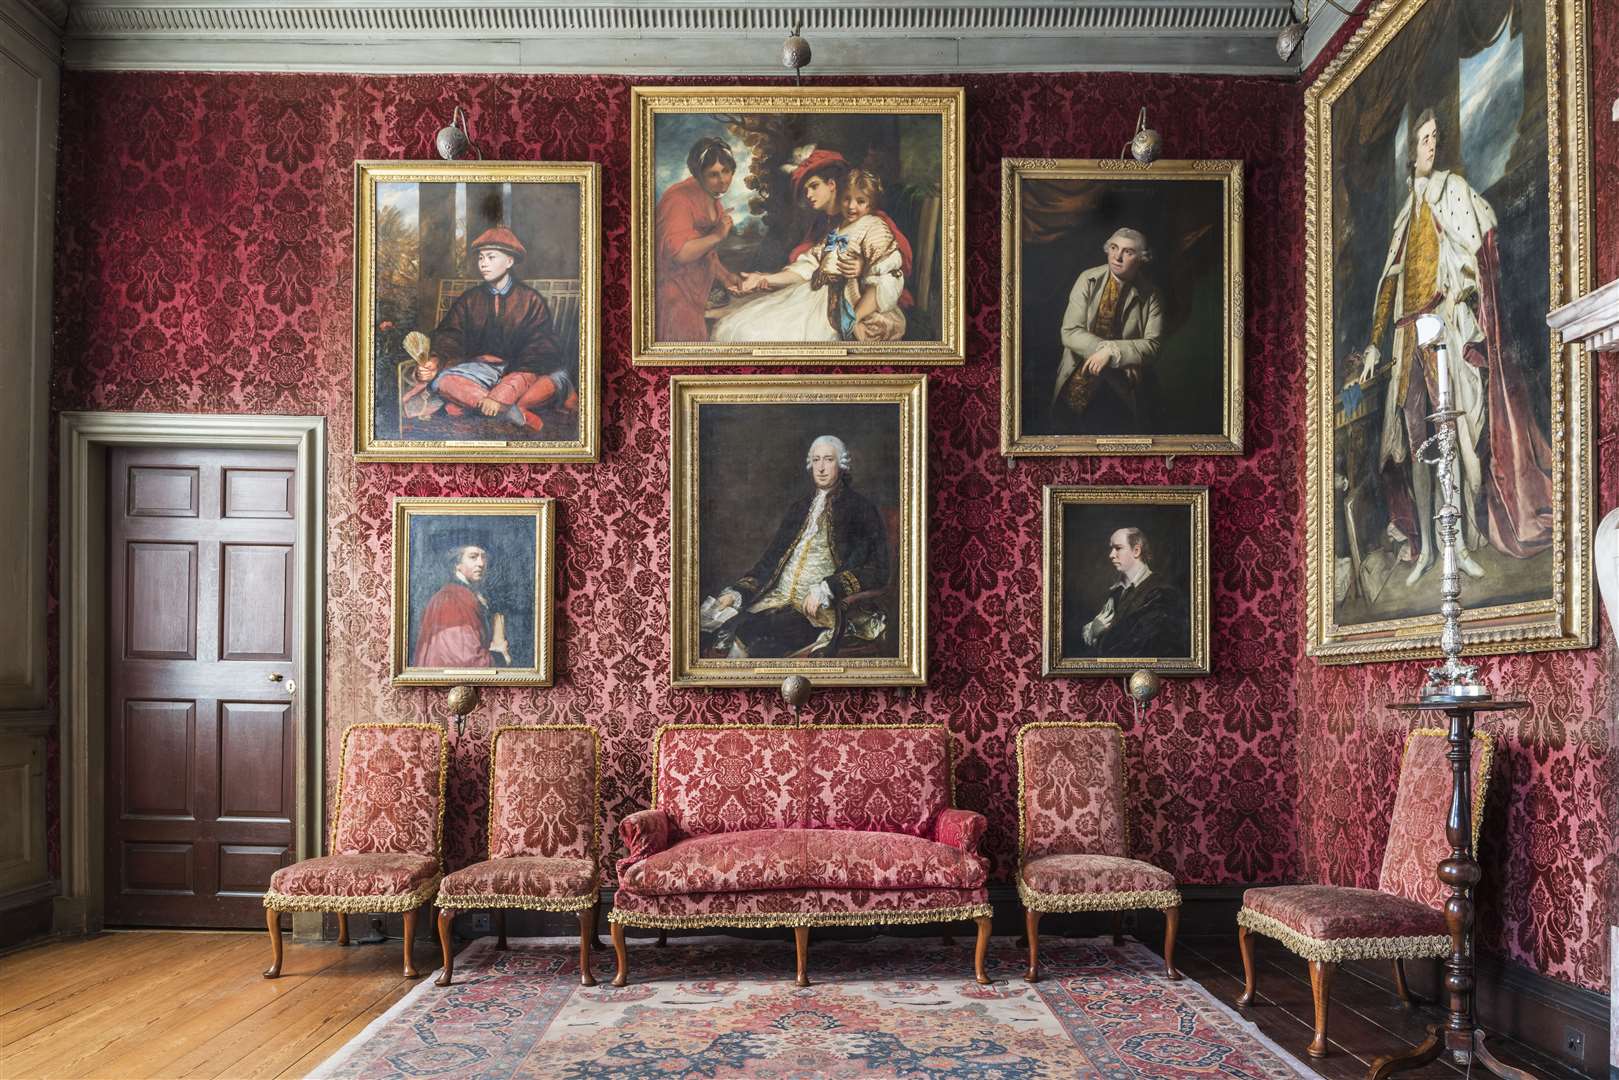 The Reynolds Room at Knole, Sevenoaks Picture: Andreas von Einsiedel/National Trust Images